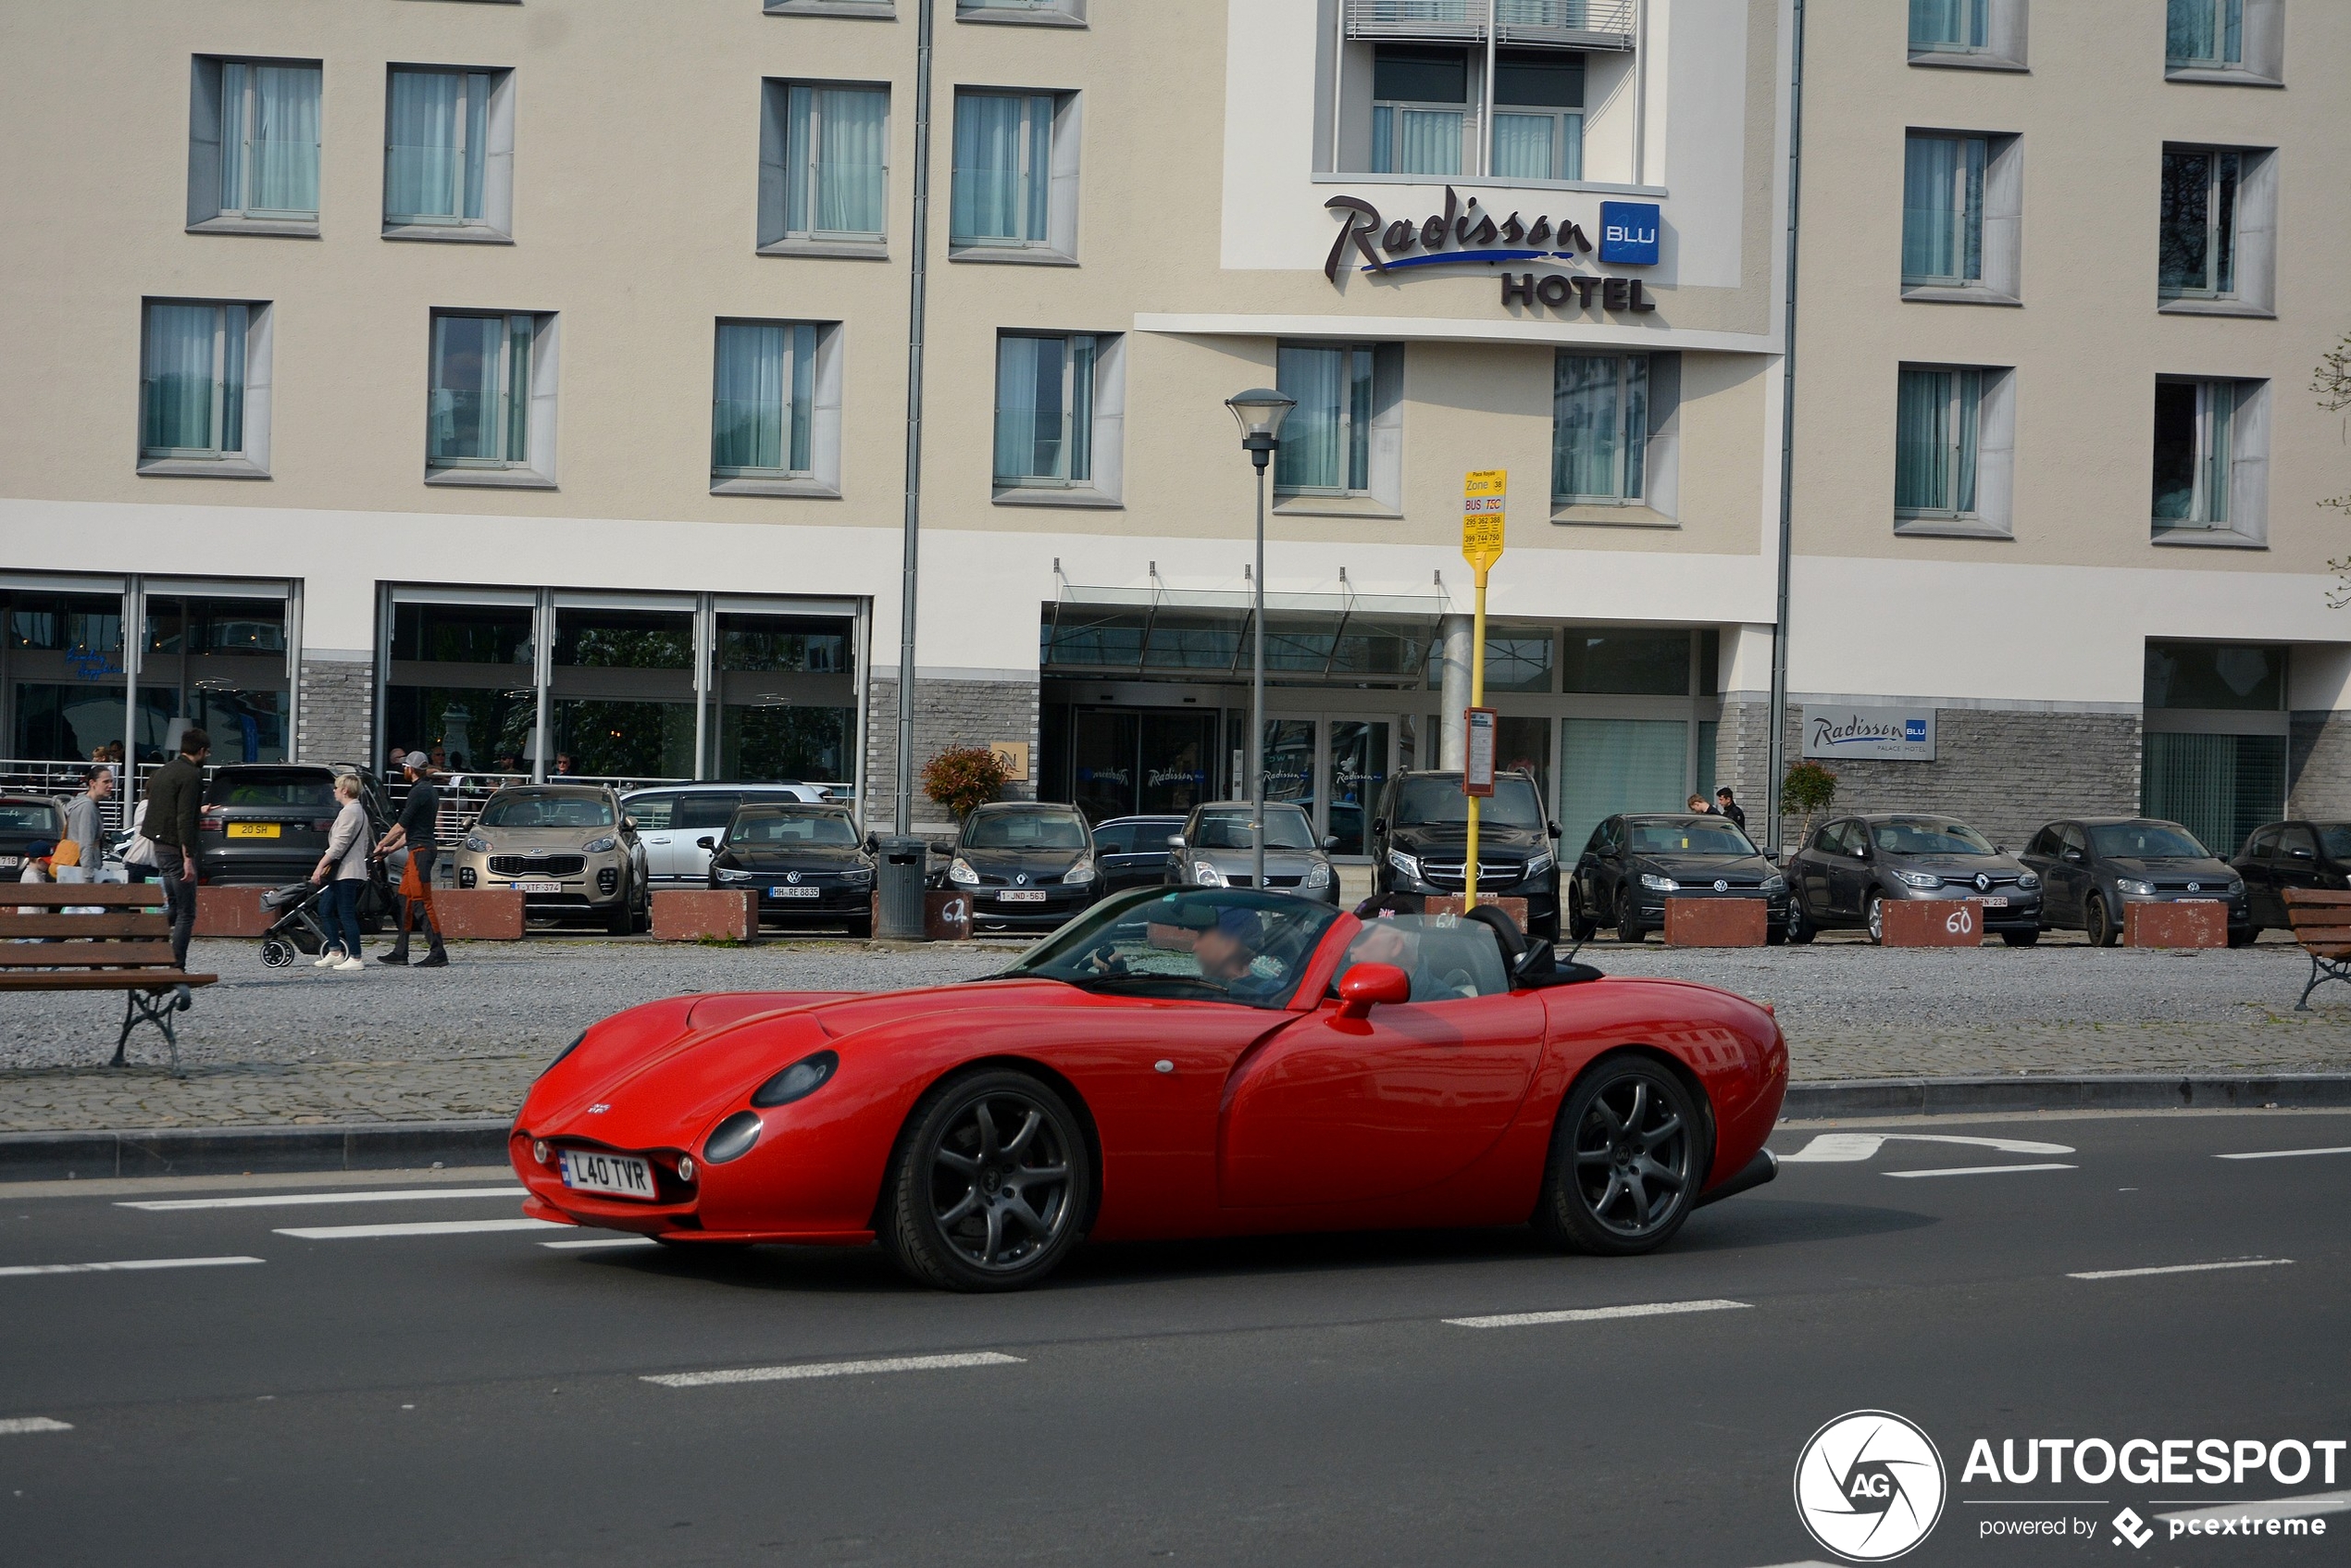 This TVR is quite uncommon